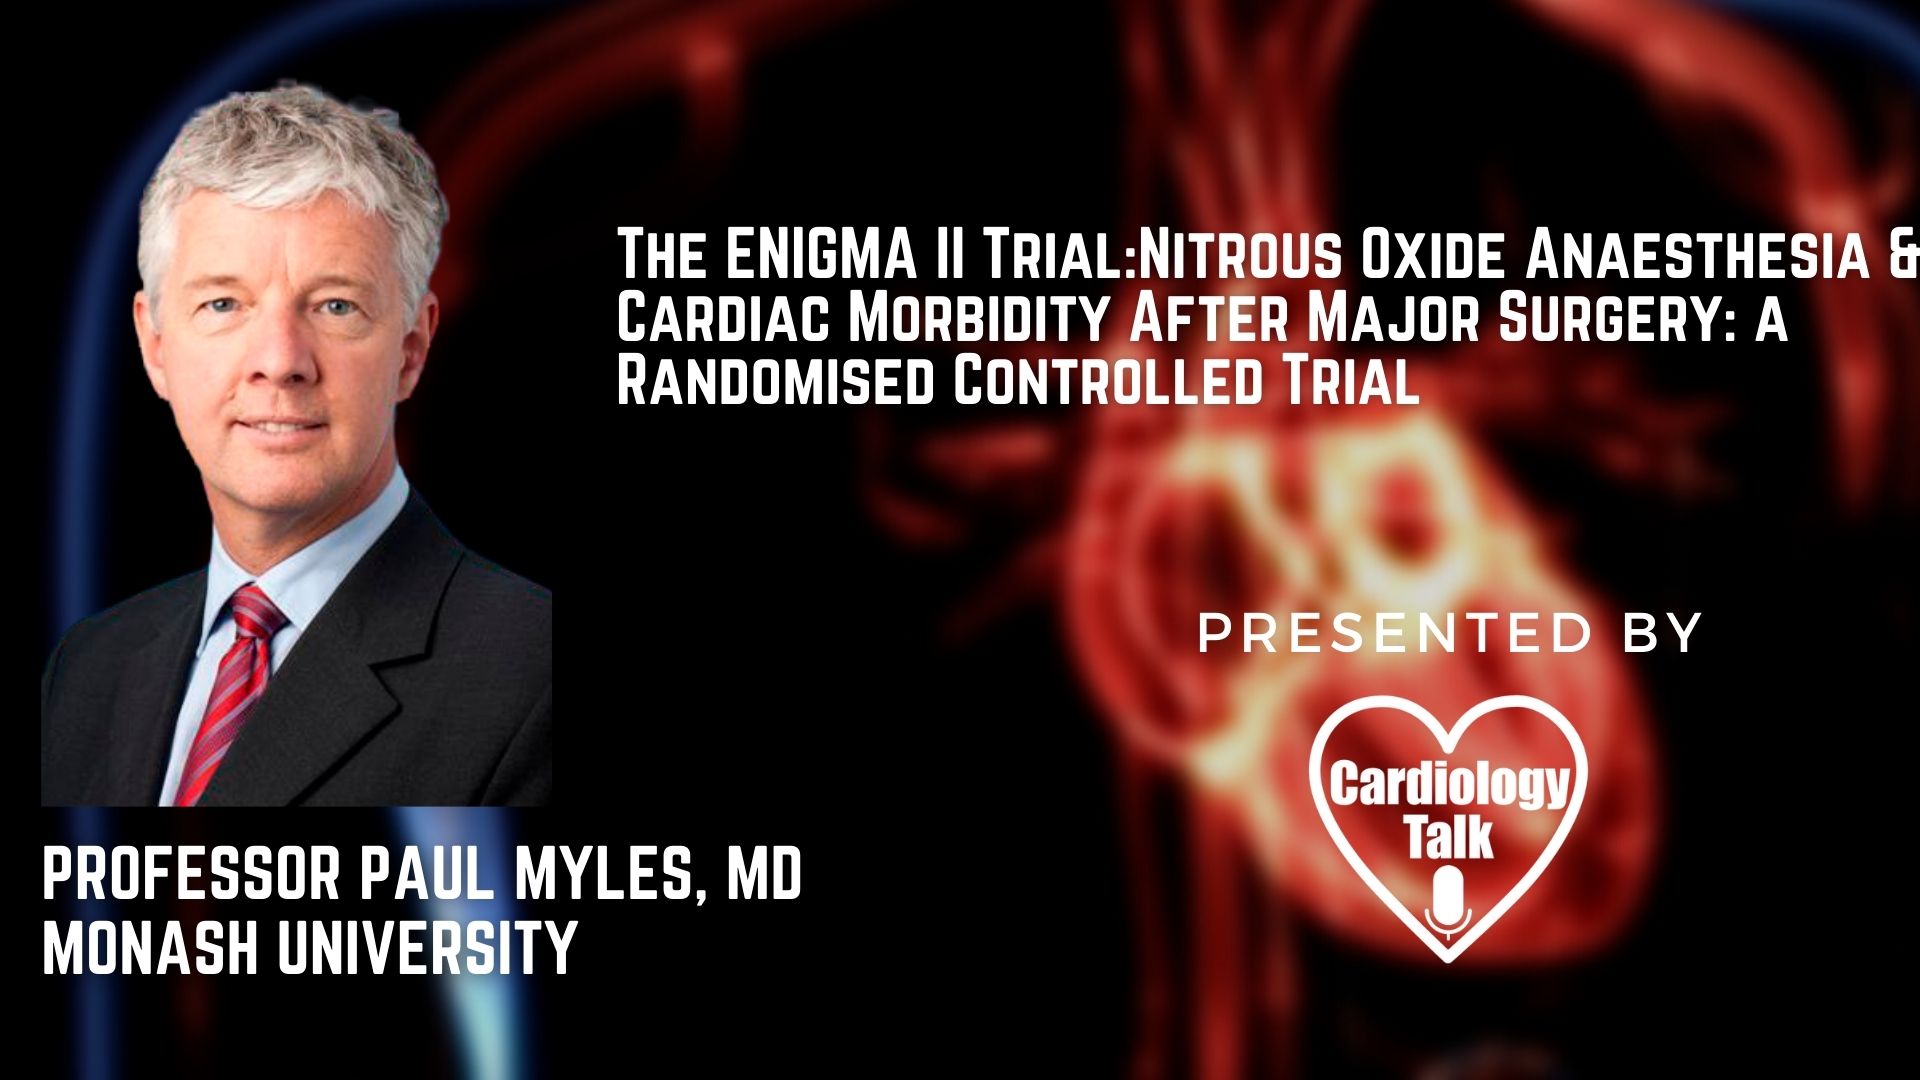 Dr. Paul Myles, MD- The ENIGMA II Trial:Nitrous Oxide Anaesthesia and Cardiac Morbidity After Major Surgery: a Randomized Controlled Trial  #ENIGMAIITrial  #MonashUniversity #Cardiology #...